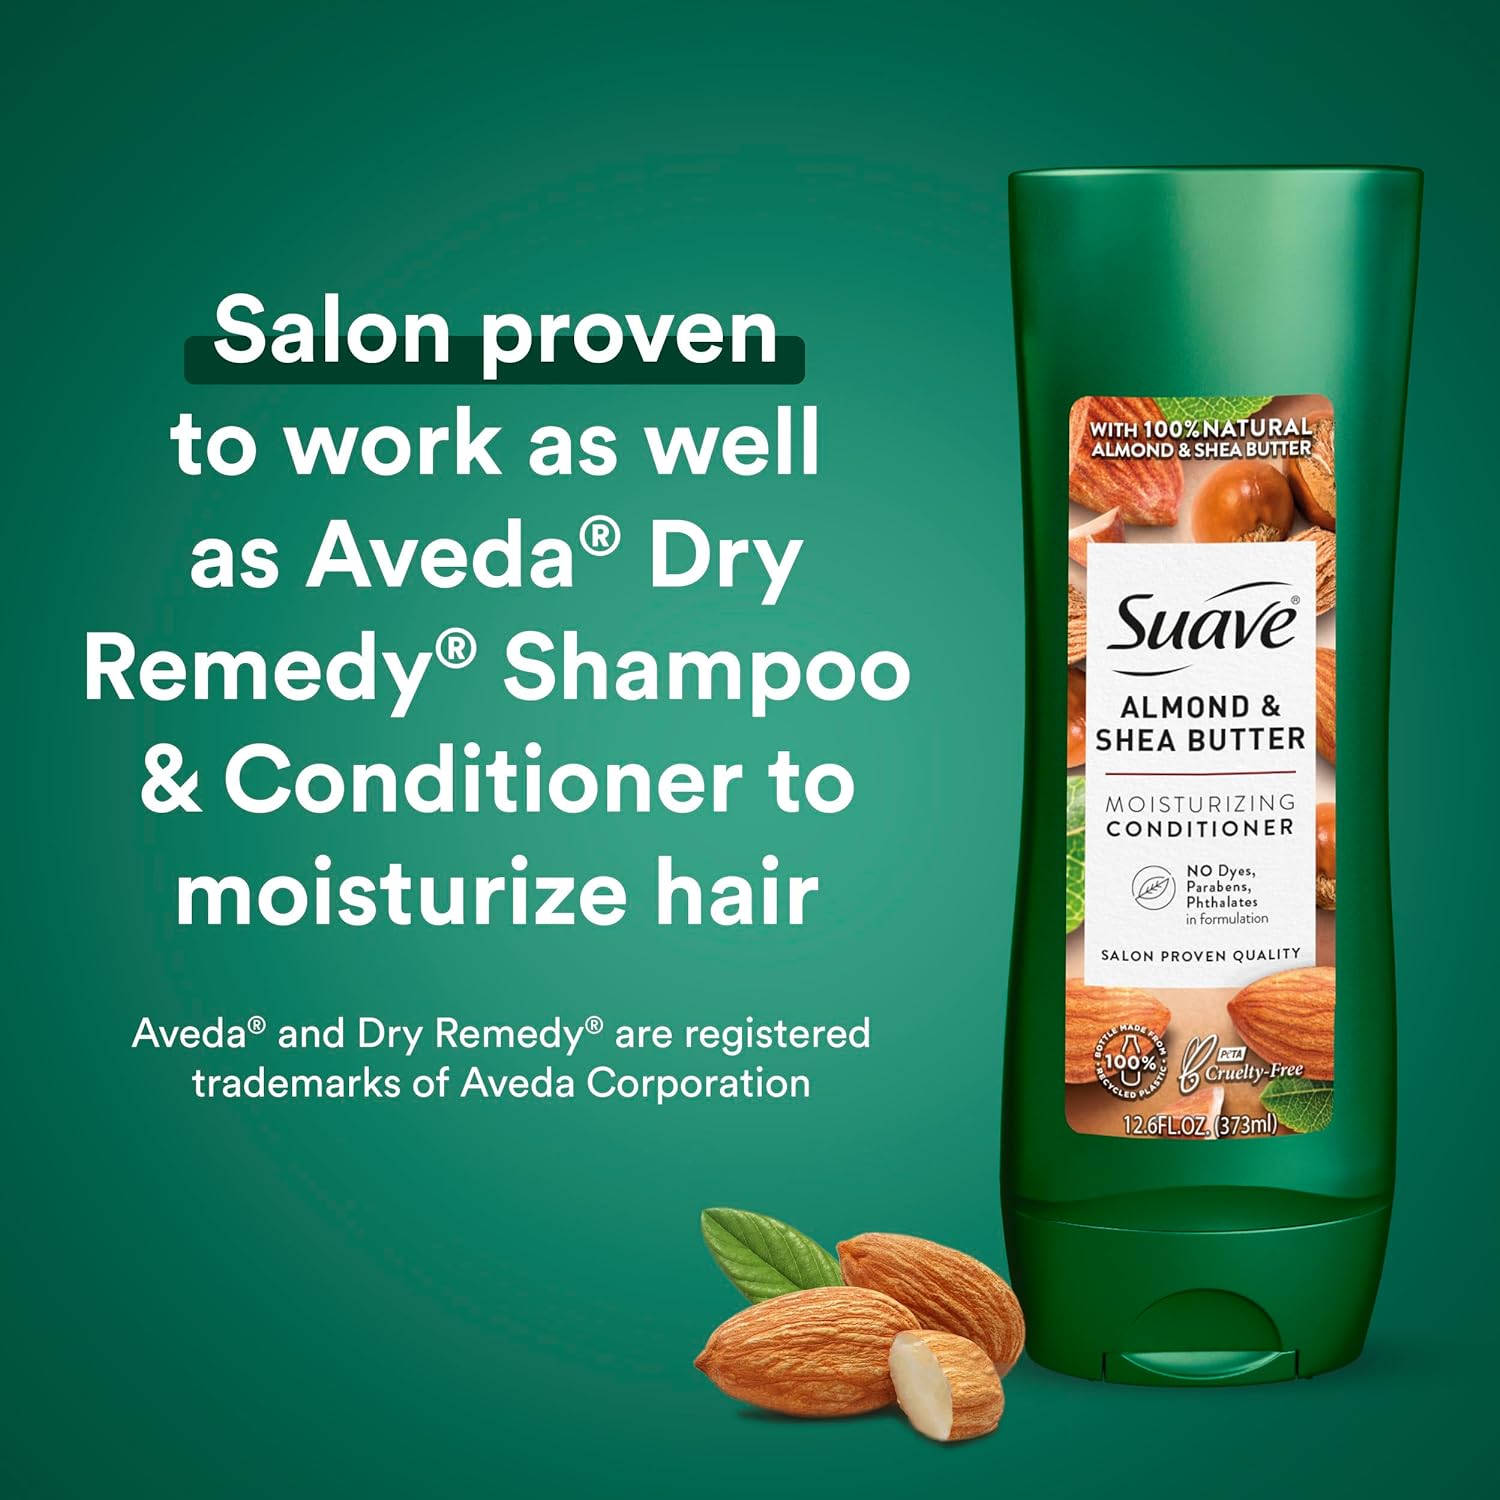 Suave Shampoo and Conditioner Set, Almond & Shea Butter - Moisturizing Shampoo & Conditioner, Dry Hair Treatment, Scented, 12.6 Oz Ea (2 Piece Set) : Beauty & Personal Care